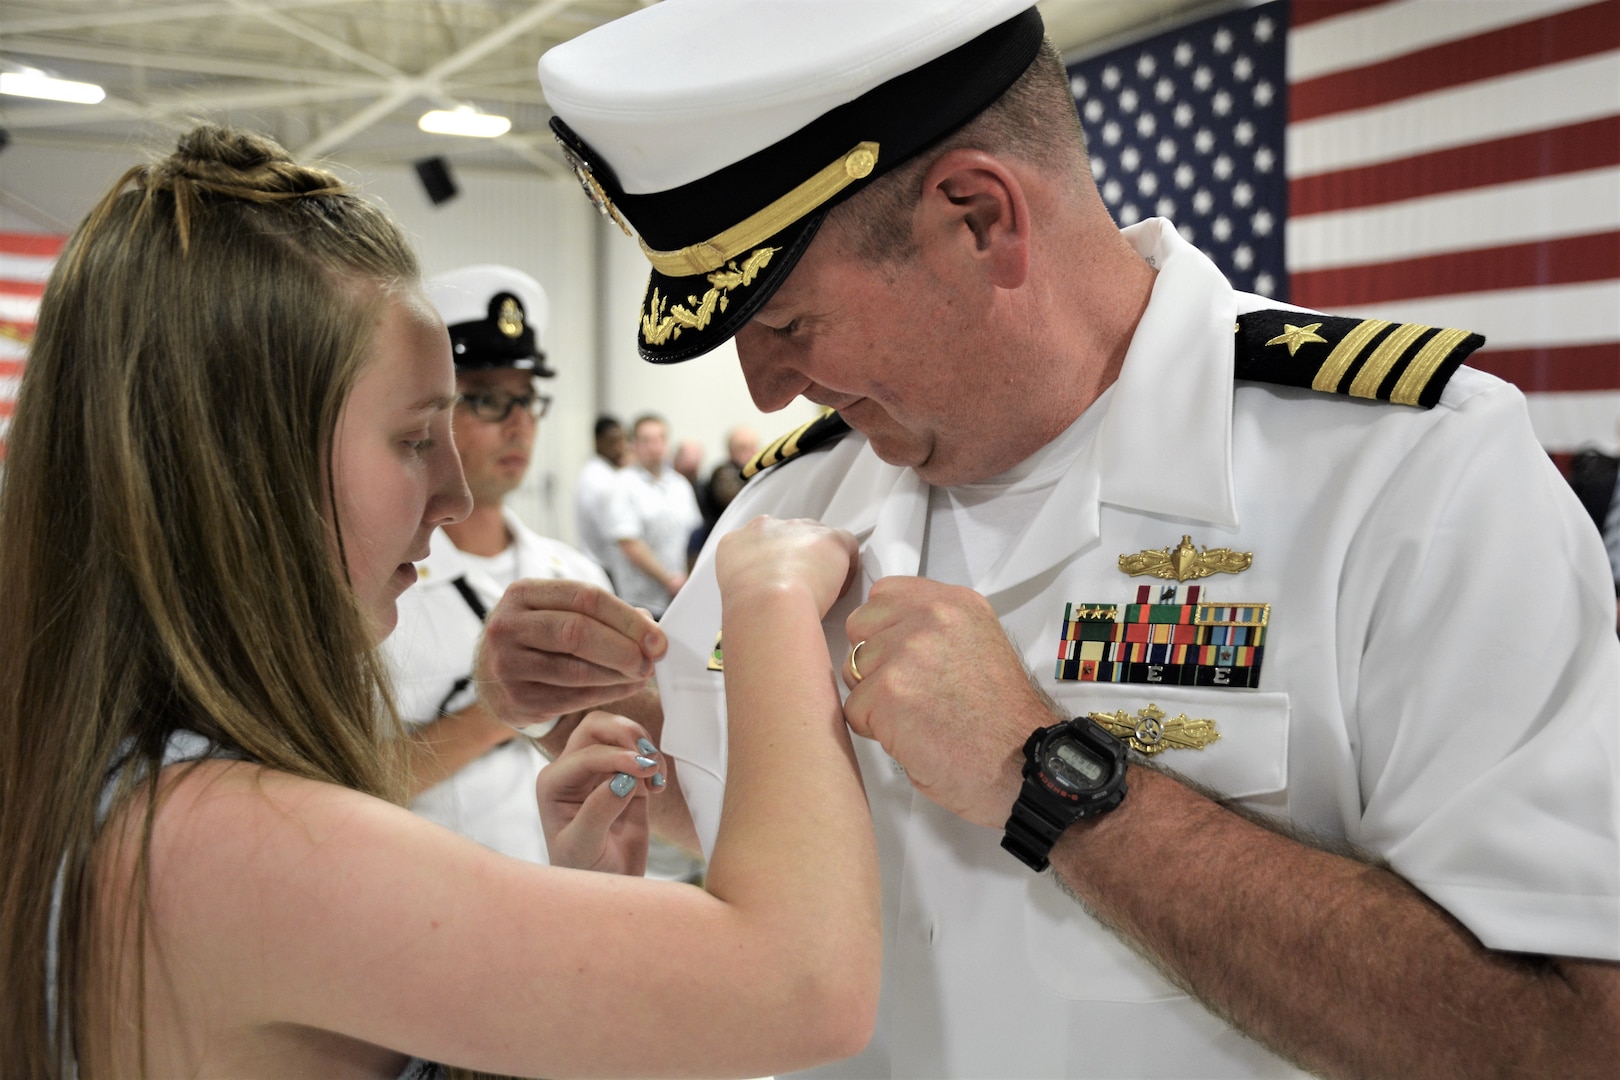 IMAGE: (Left to right) Cmdr. Joseph Oravec’s daughter pins the Commanding Officer Ashore pin to her father’s shirt following Naval Surface Warfare Center Dahlgren Division, Dam Neck Activity’s change of command. More than 200 Sailors and guests attended a traditional ceremony at Naval Air Station (NAS) Oceana’s Center for Naval Aviation Technical Training Unit’s ceremonial hangar aboard NAS Oceana June 27 where Cmdr. Andrew Hoffman was relieved of command by Oravec. Oravec became the command’s 28th commanding officer.